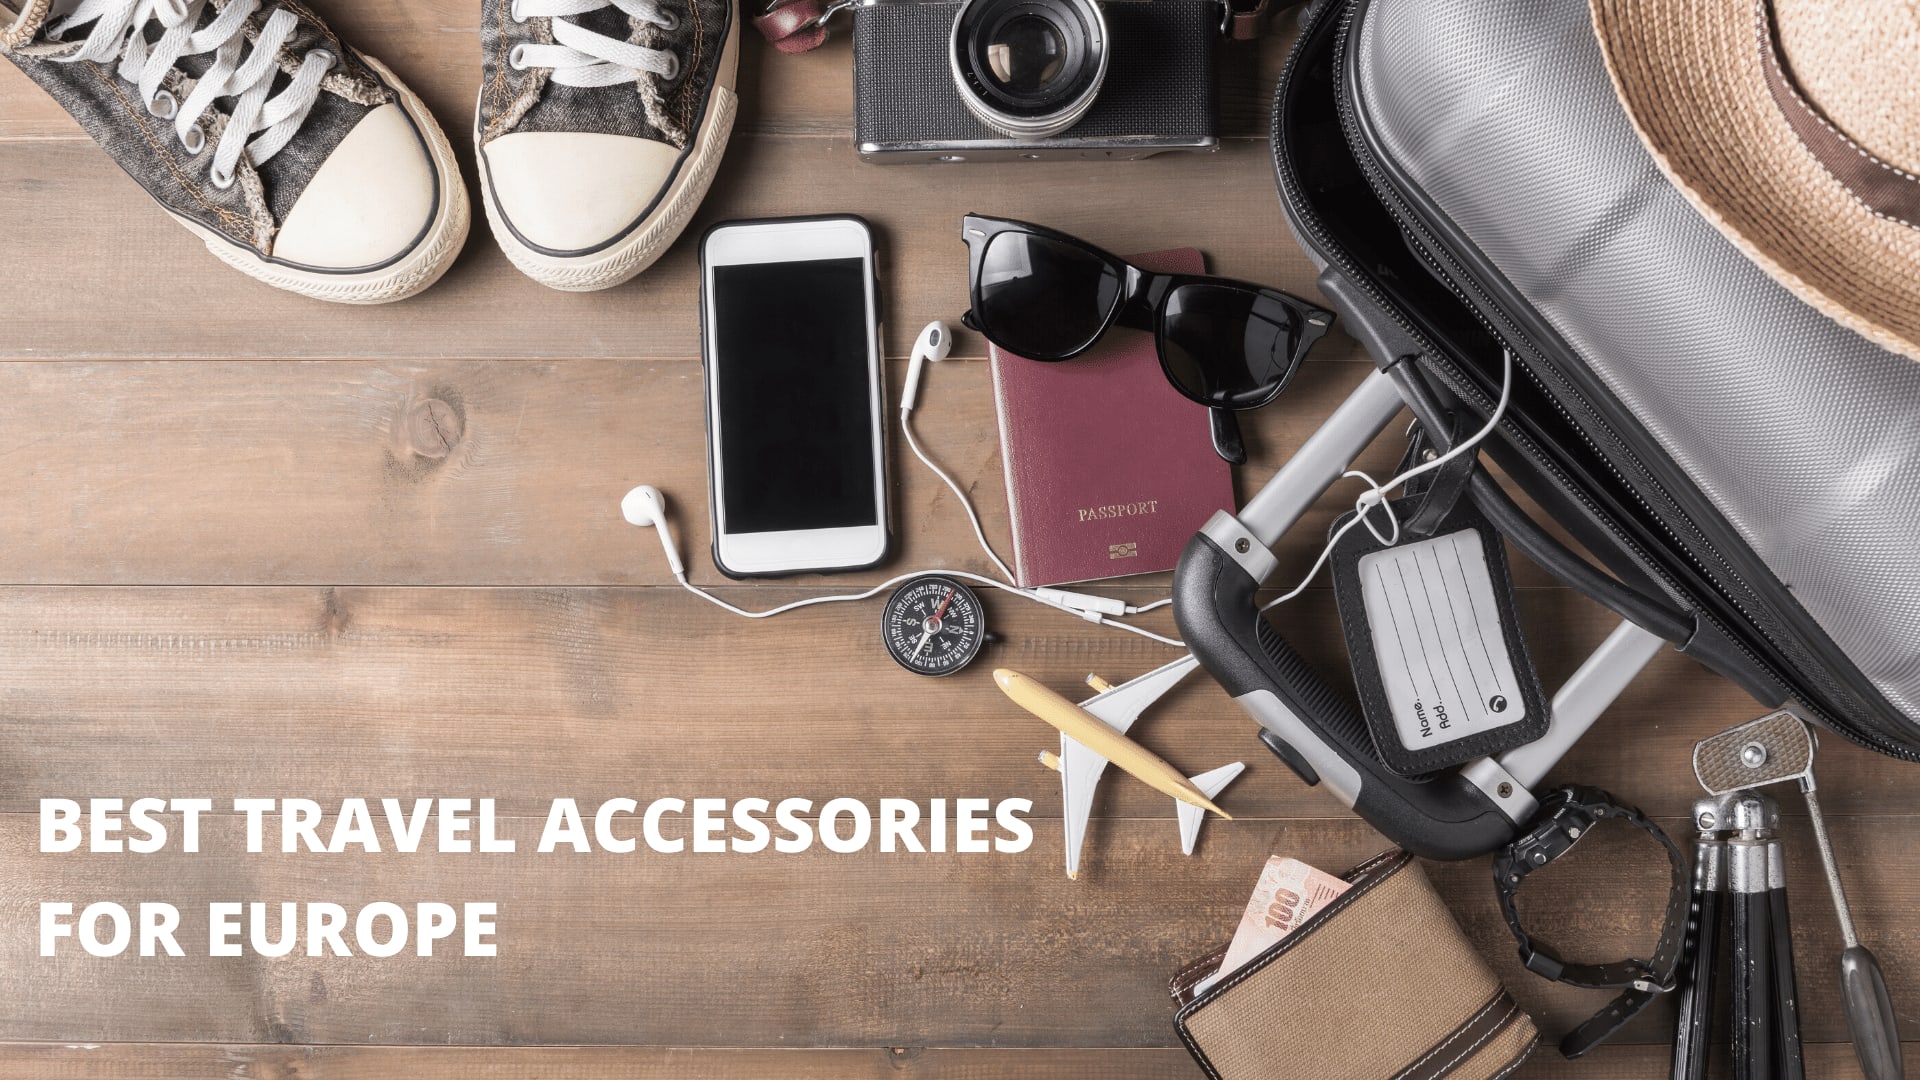 Best Travel Accessories on Sale at